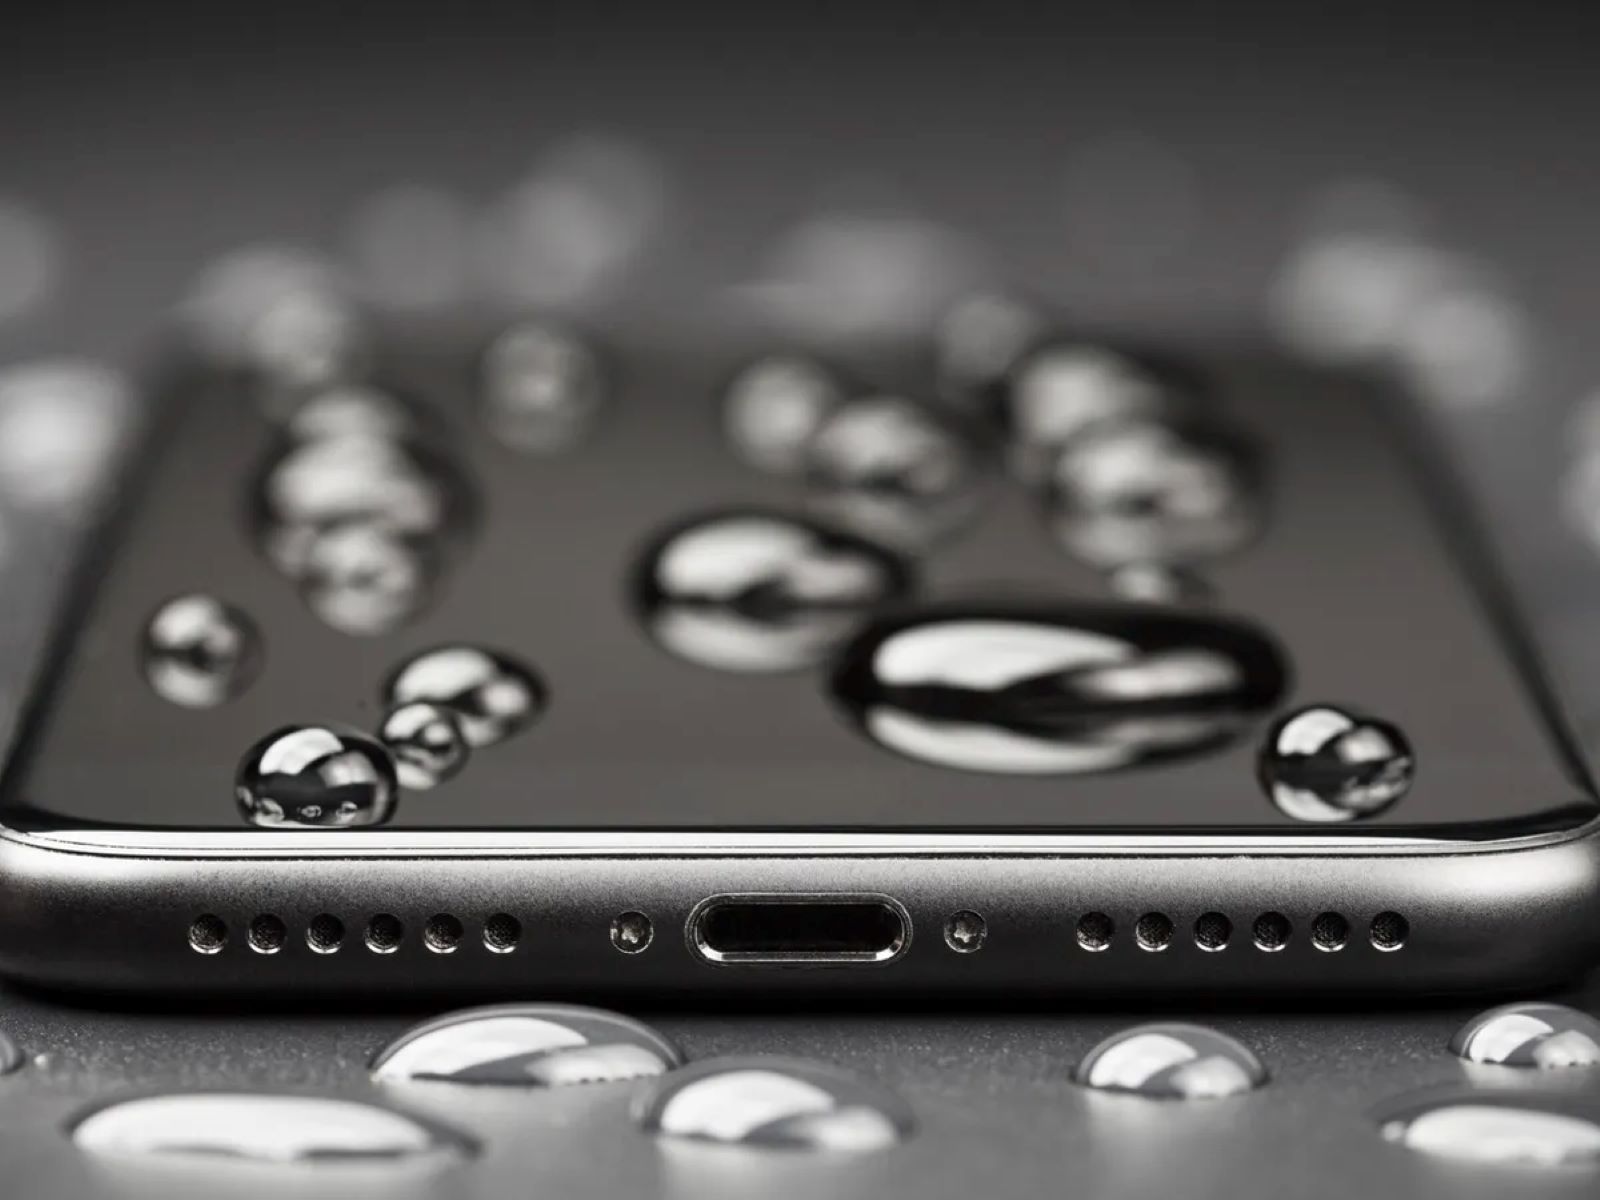 water-damage-indicators-identifying-signs-of-water-damage-on-iphone-11